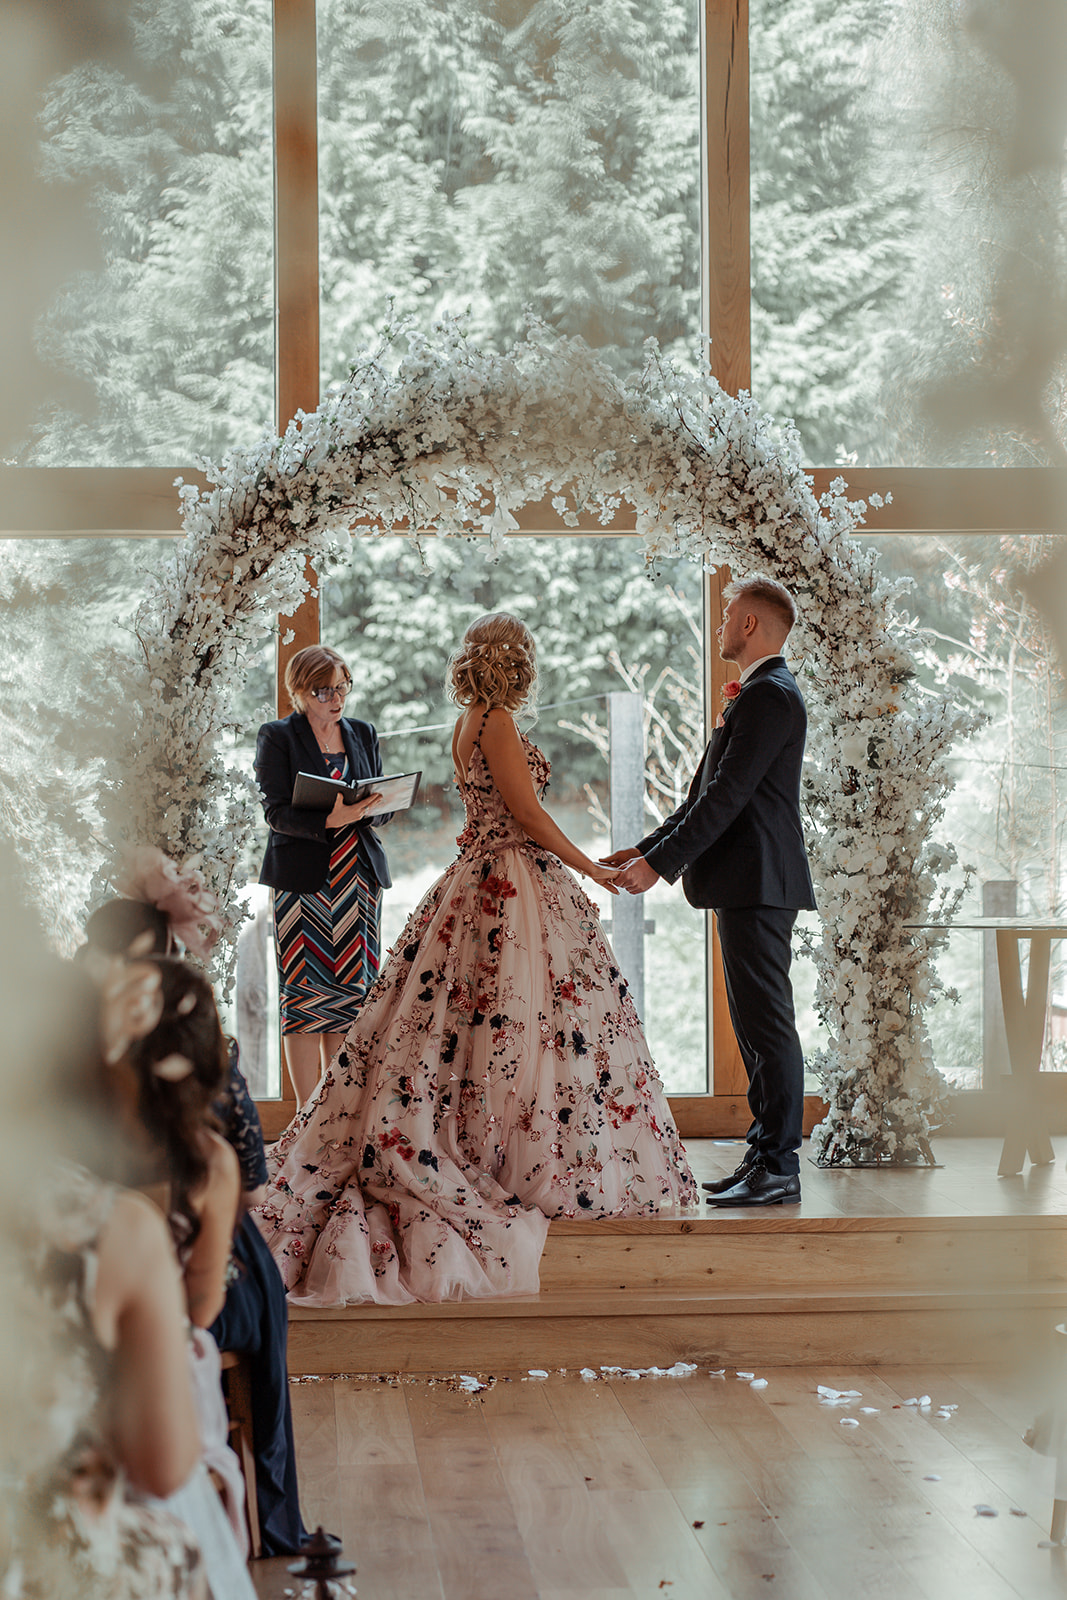 Ronald Joyce real bride, Rebecca, and her husband, Michael, holding hands while saying their vows in front of the registrar. Rebecca has curled blonde hair and wears our blush coloured Celestina ballgown wedding dress.